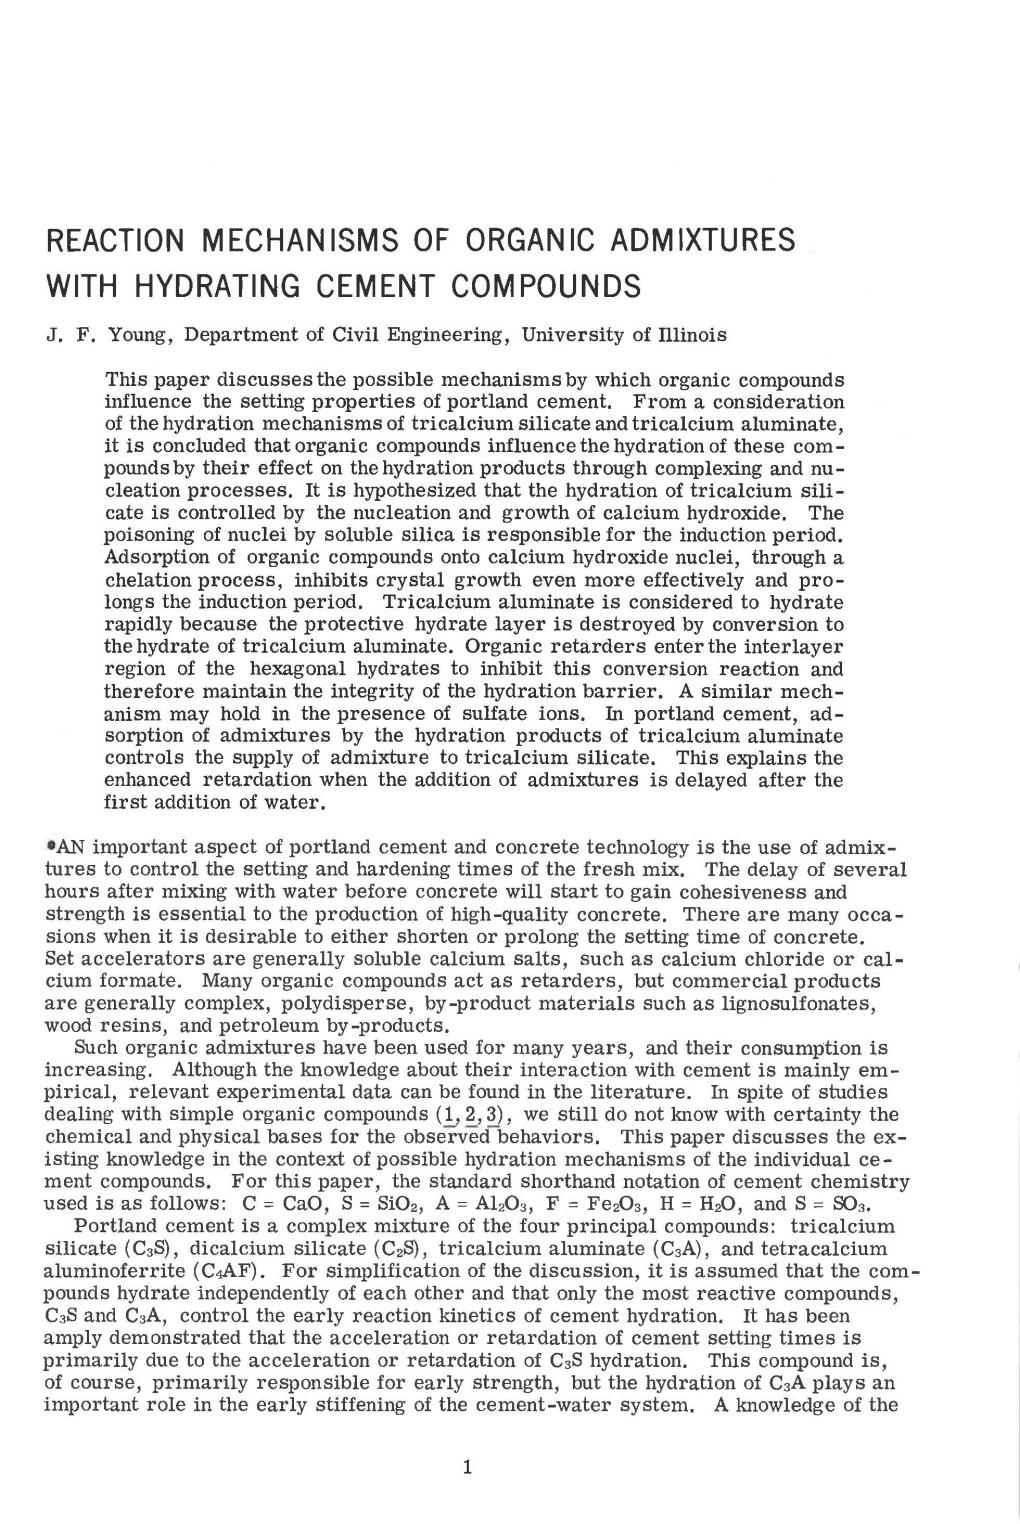 Reaction Mechanisms of Organic Admixtures with Hydrating Cement Compounds